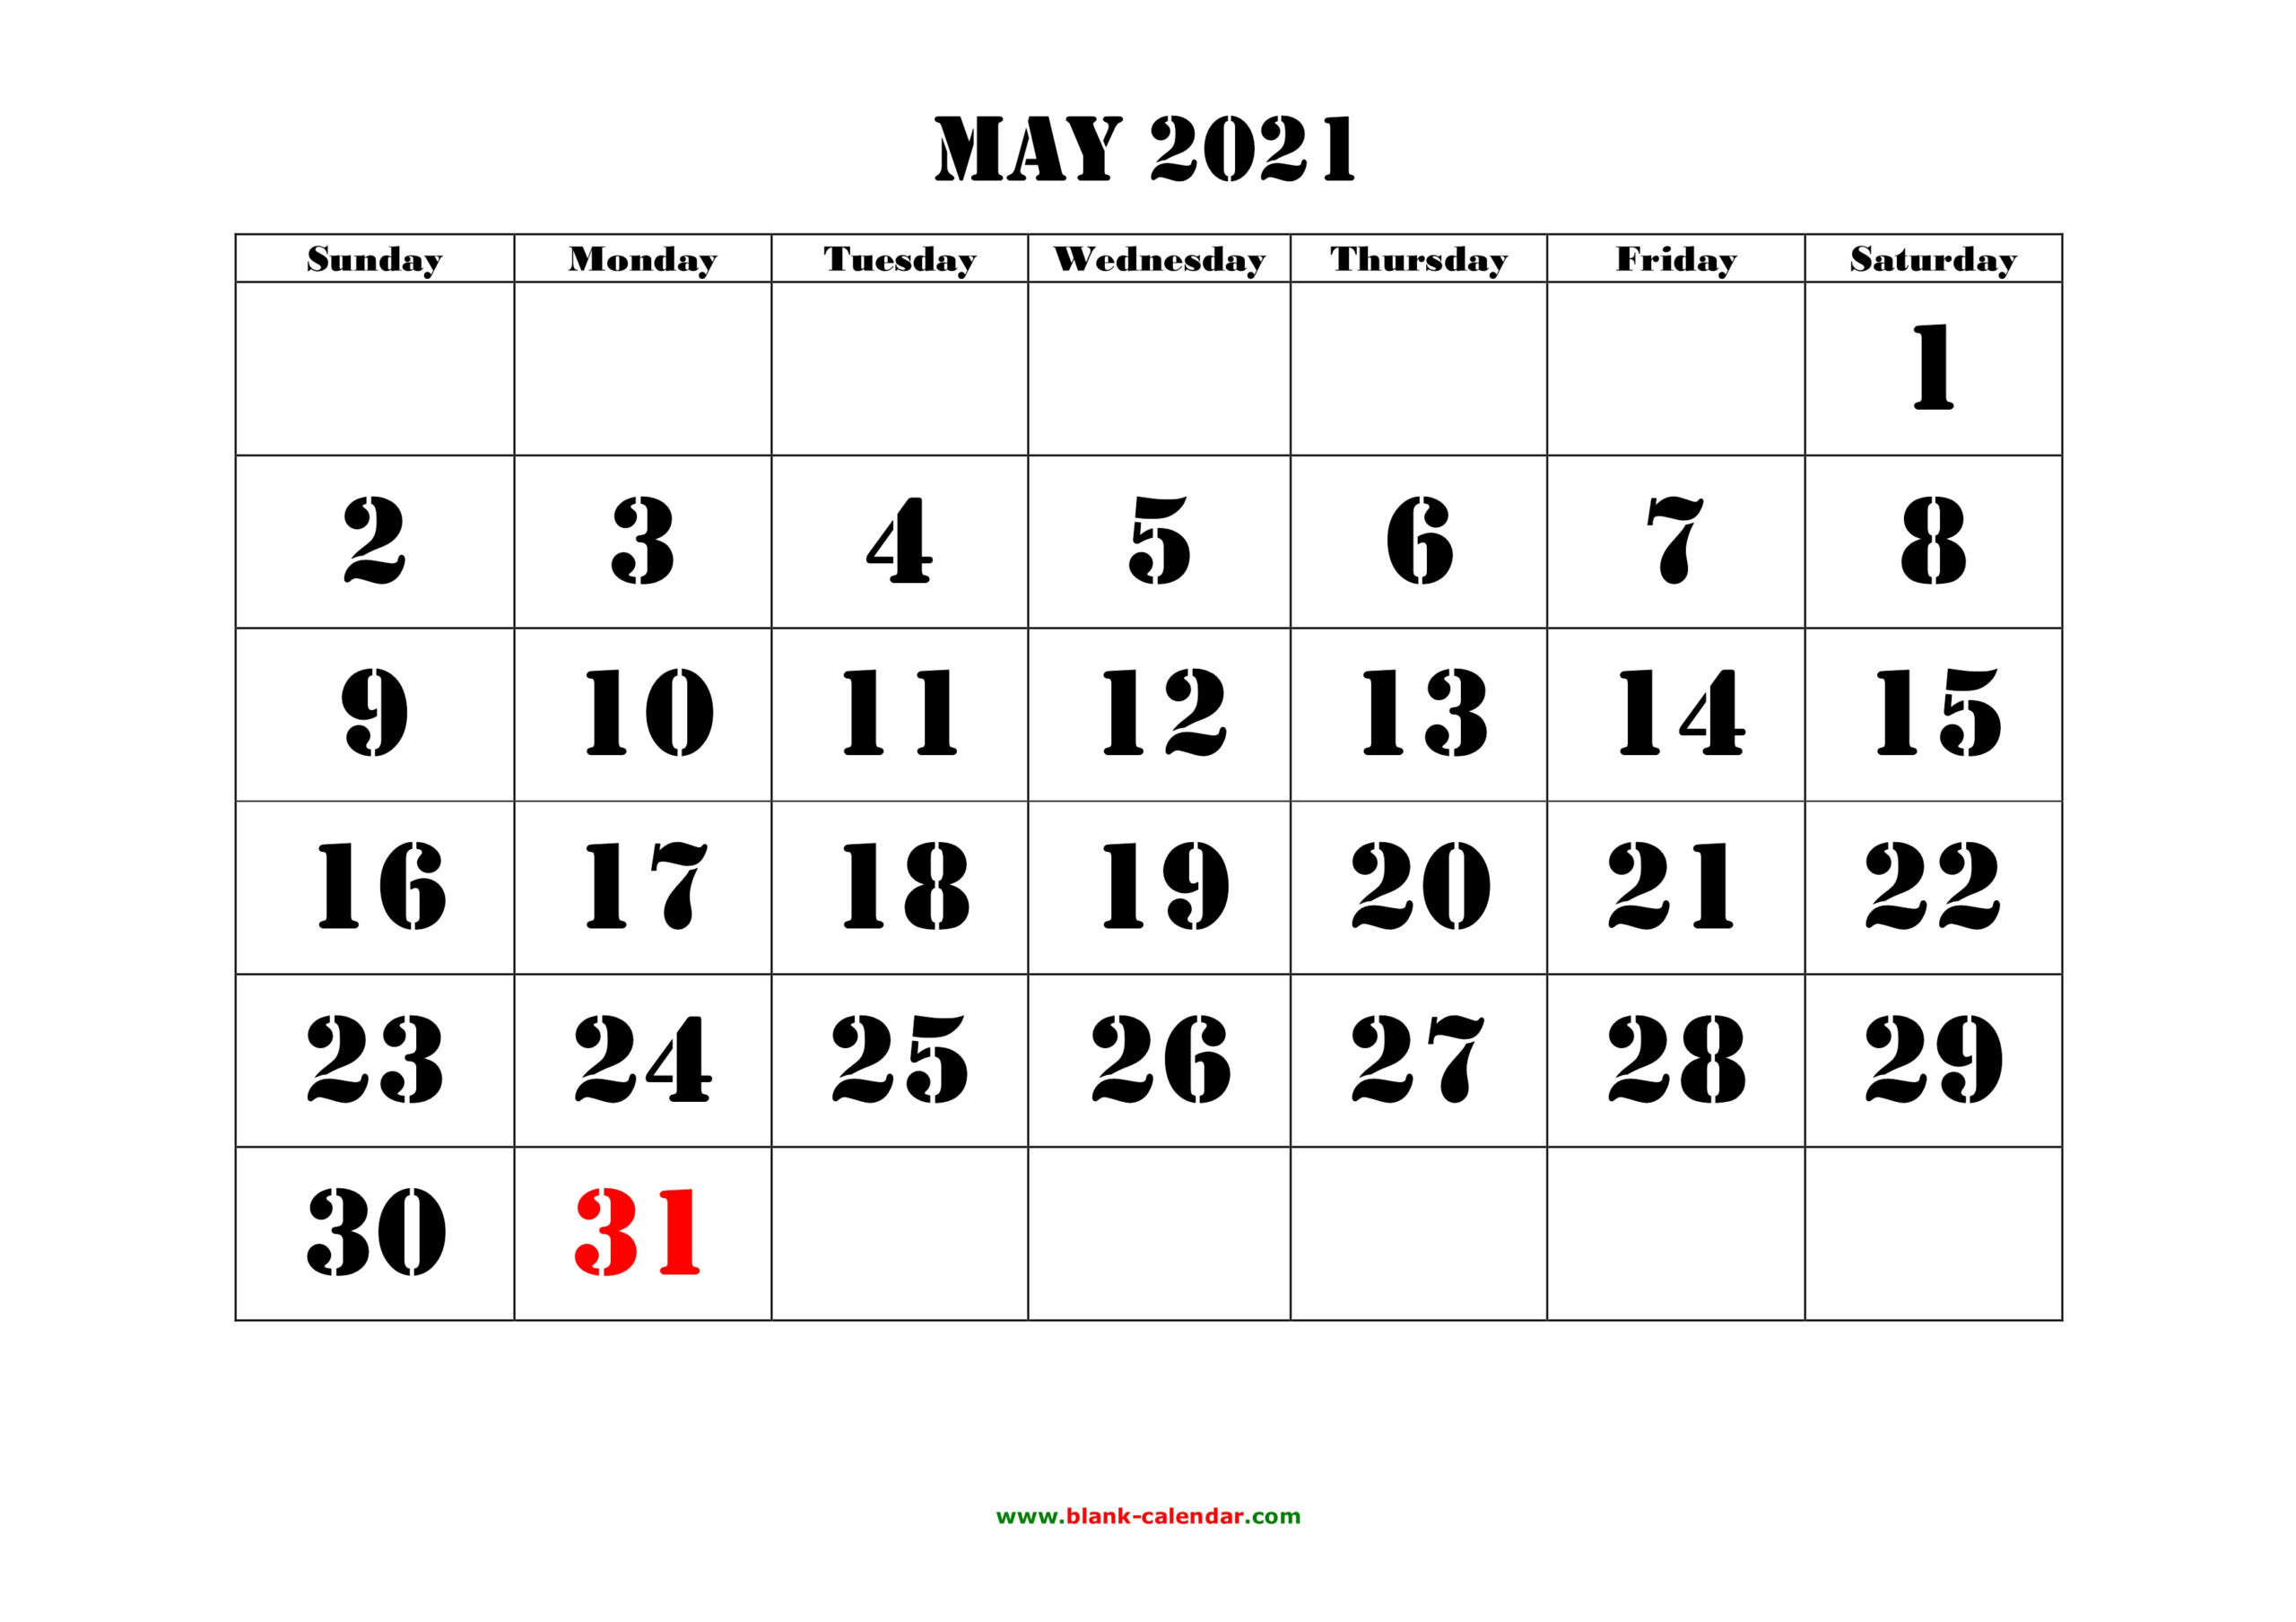 2021 Print Free Calendars Without Downloading | Calendar  Free Printable Calendar 2021 Without Download